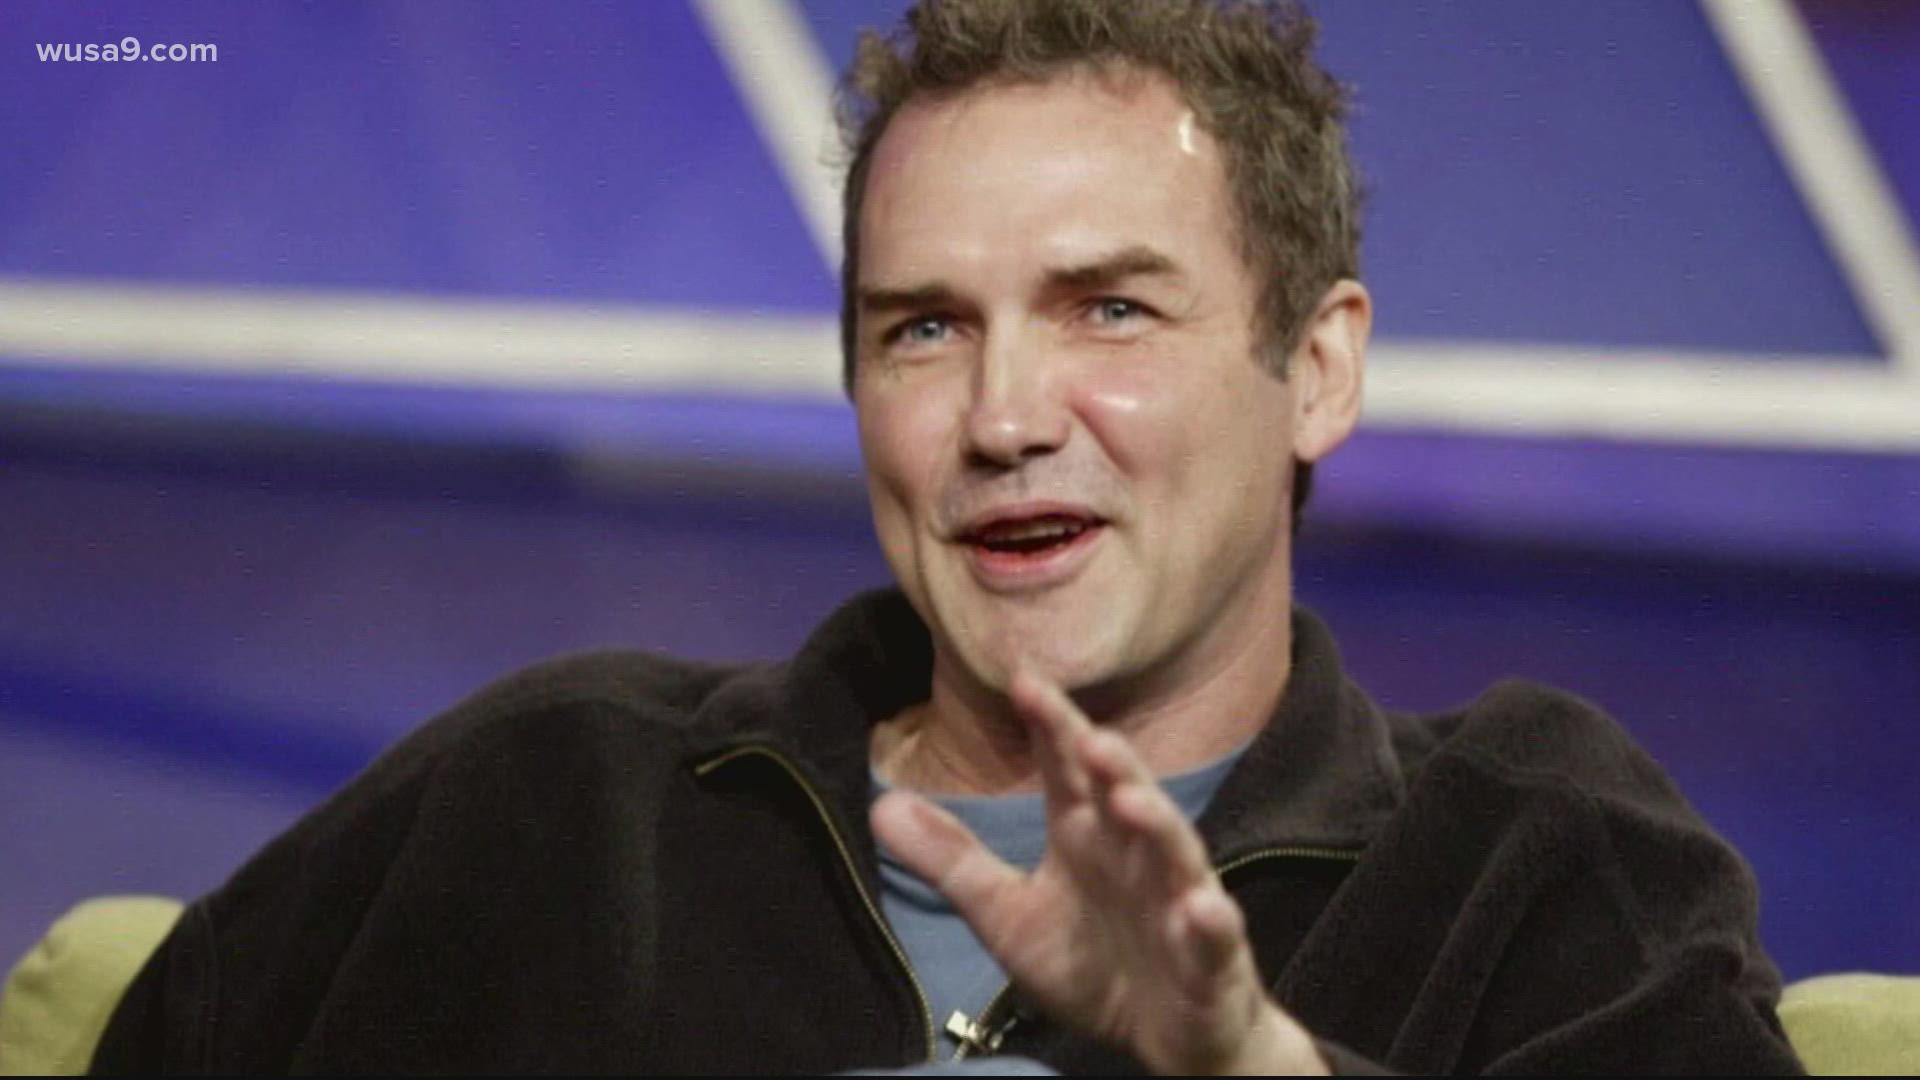 Norm Macdonald was bold and true to himself, but he wasn't for everyone.